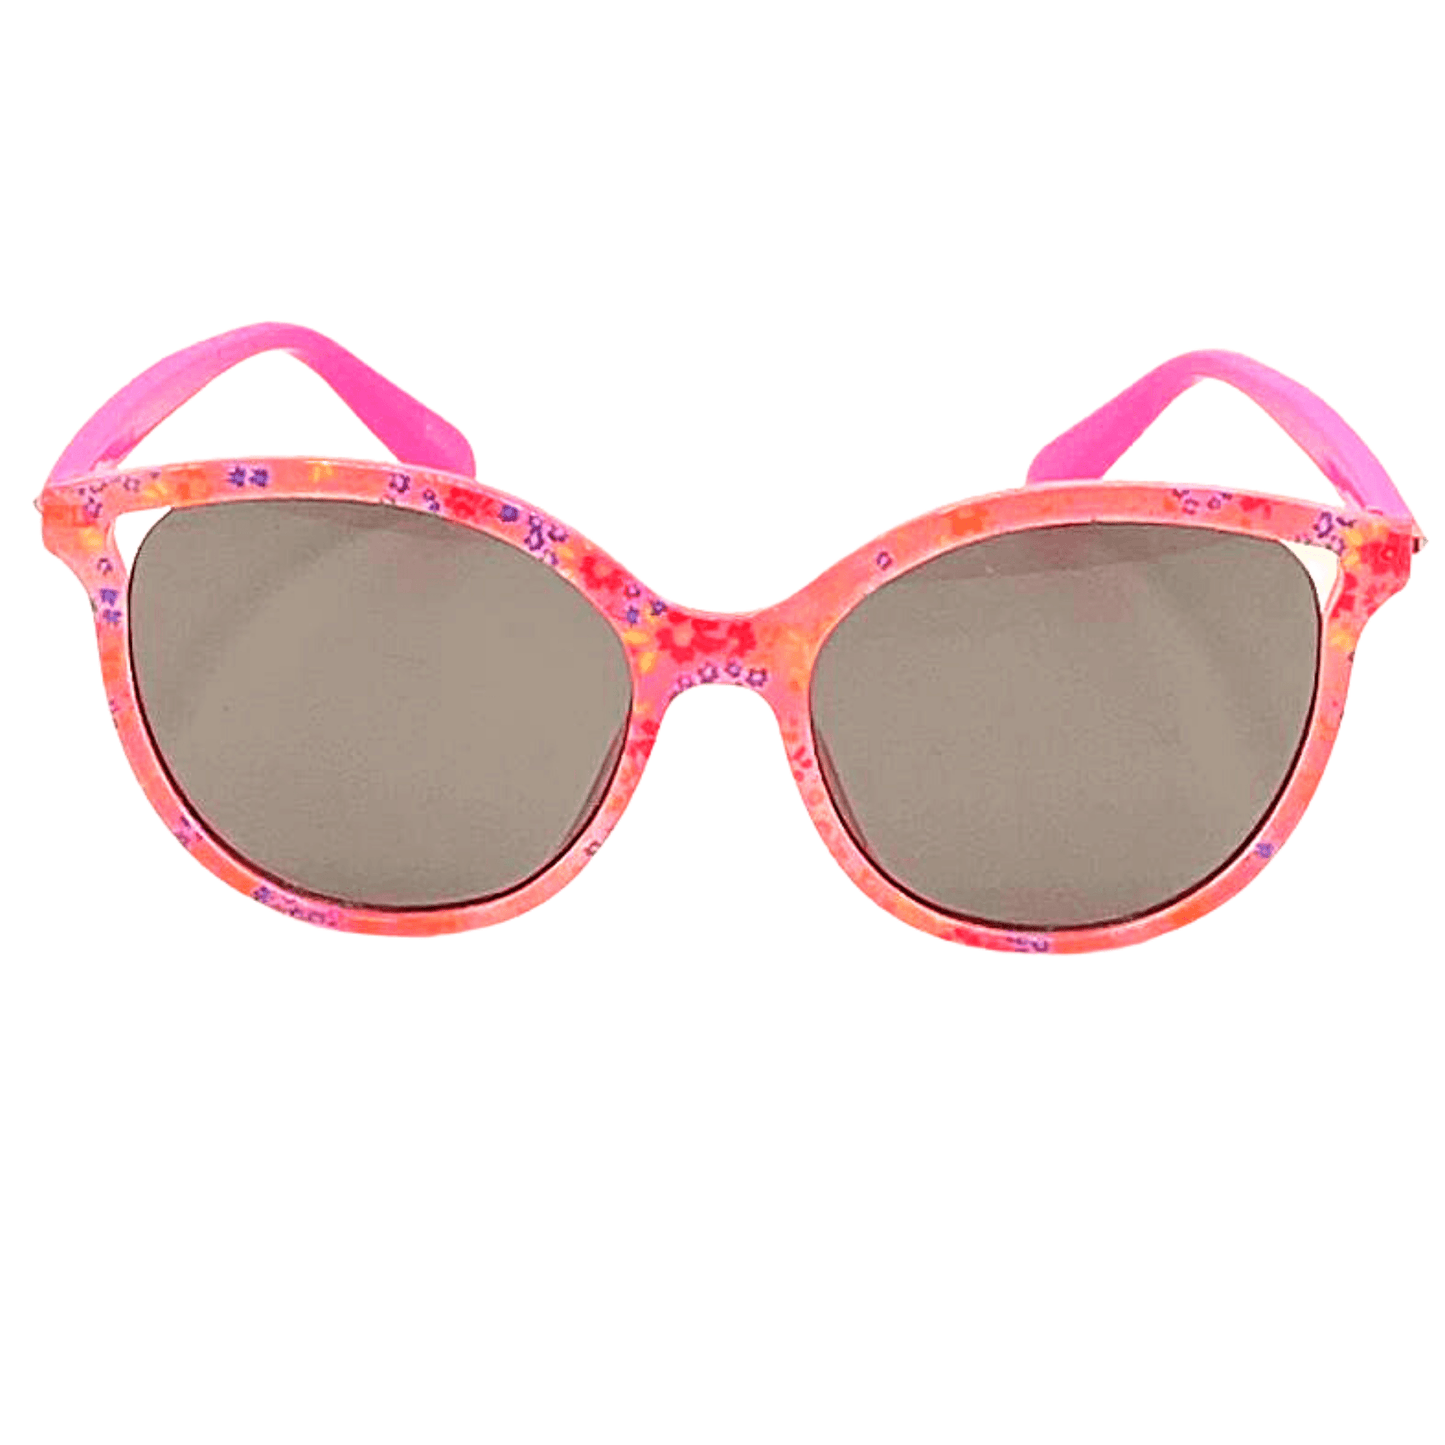 These full-framed, pink floral sunglasses are perfect for a bright, summer day.  These sunglasses are LEAD FREE with UV 400 Protection.